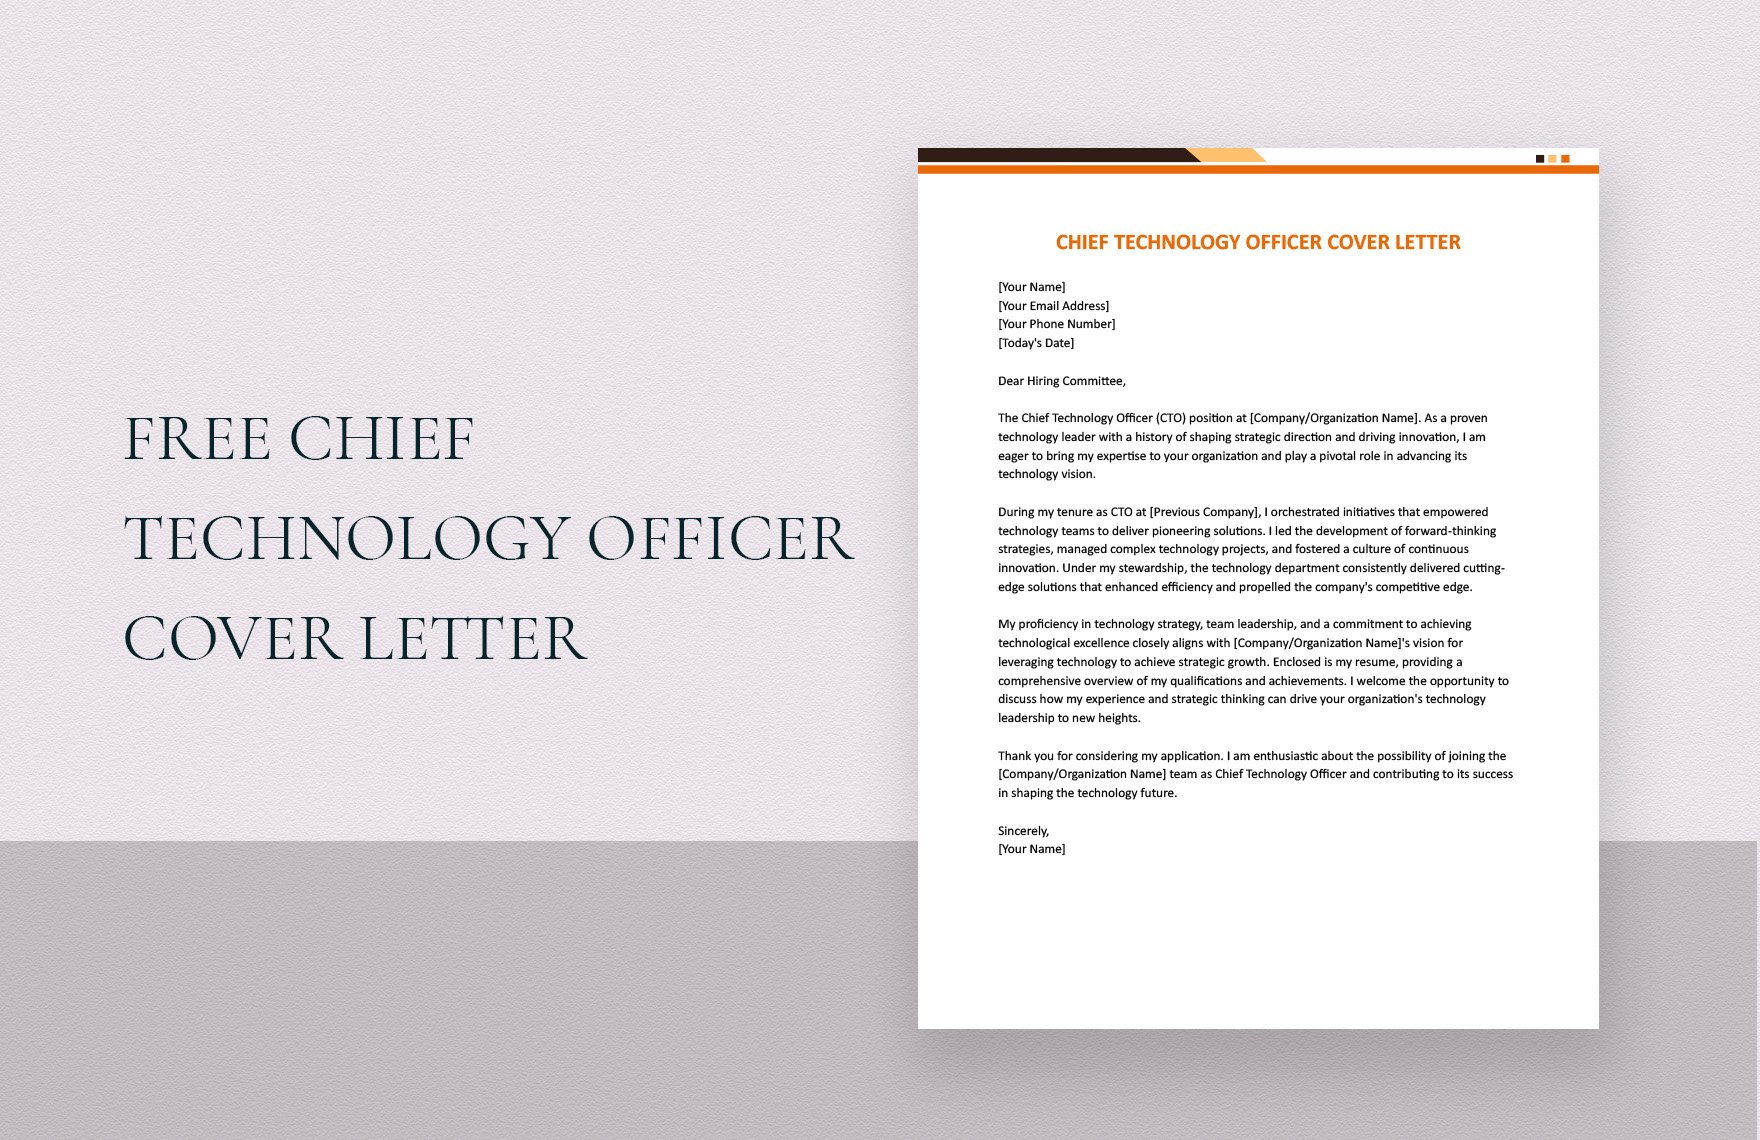 Chief Technology Officer Cover Letter